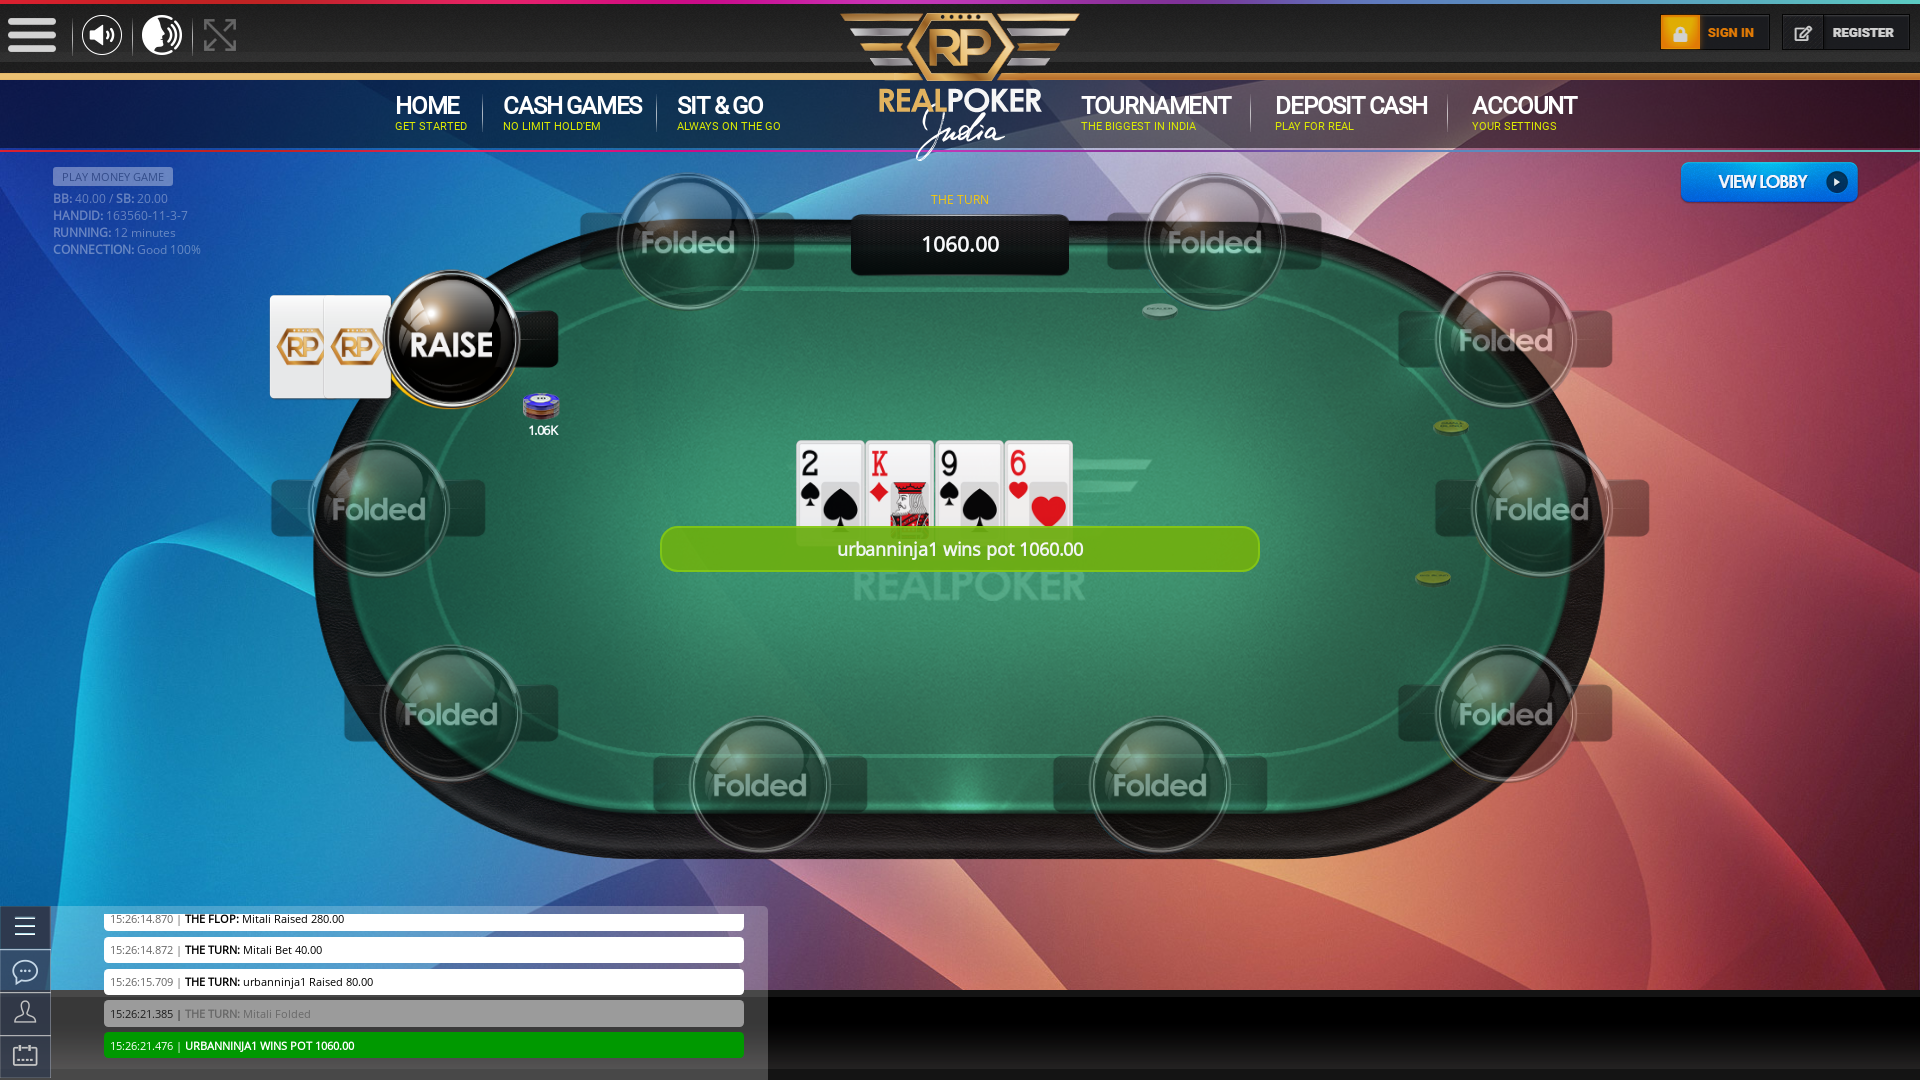 10 player poker in the 12th minute